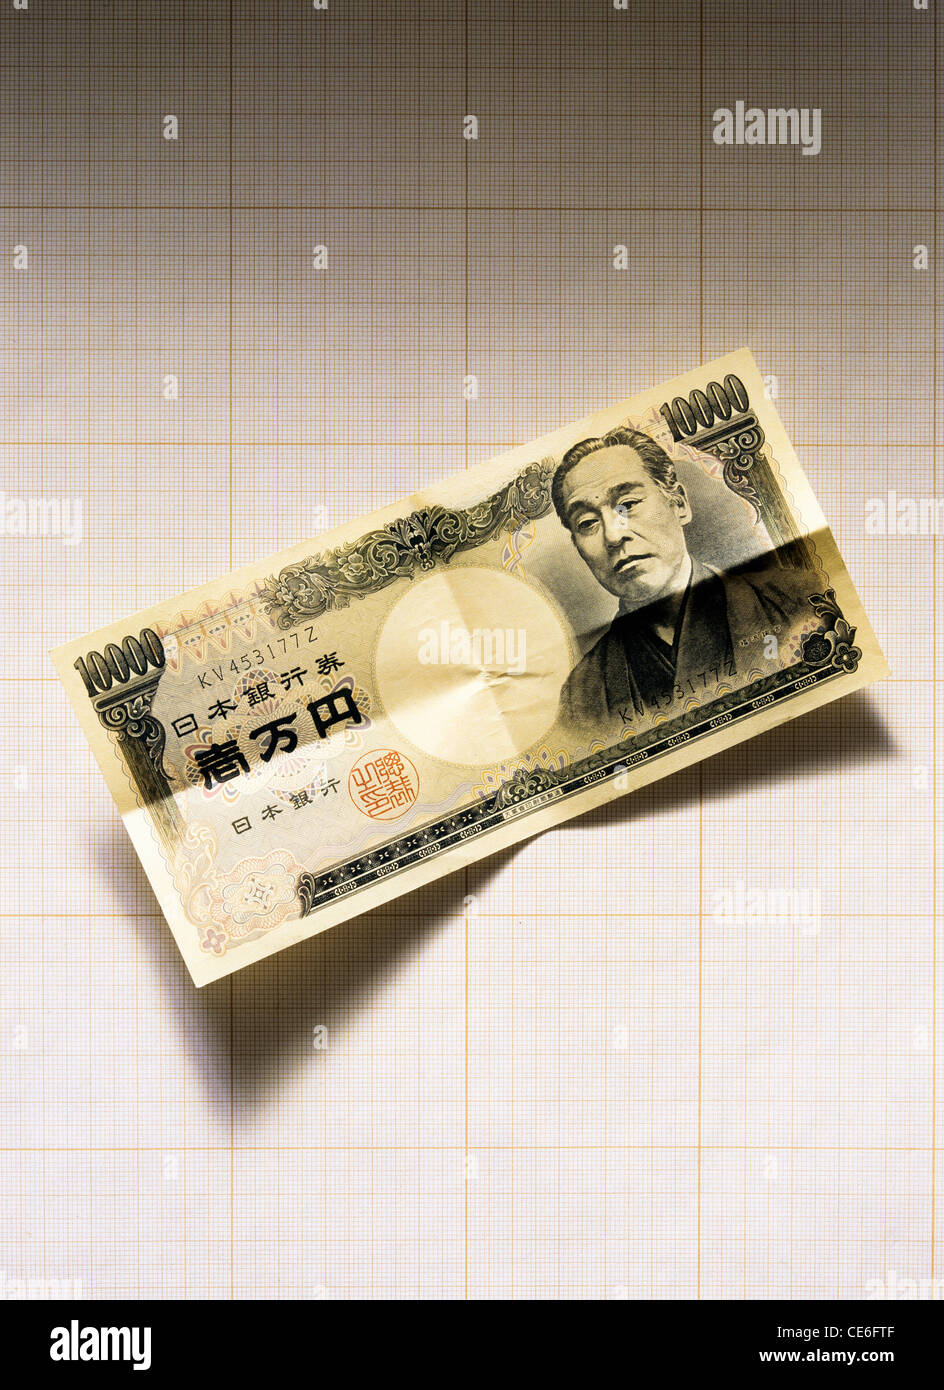 UNFOLDED 10,000 JAPANESE YEN BANKNOTE ON GRAPH PAPER Stock Photo